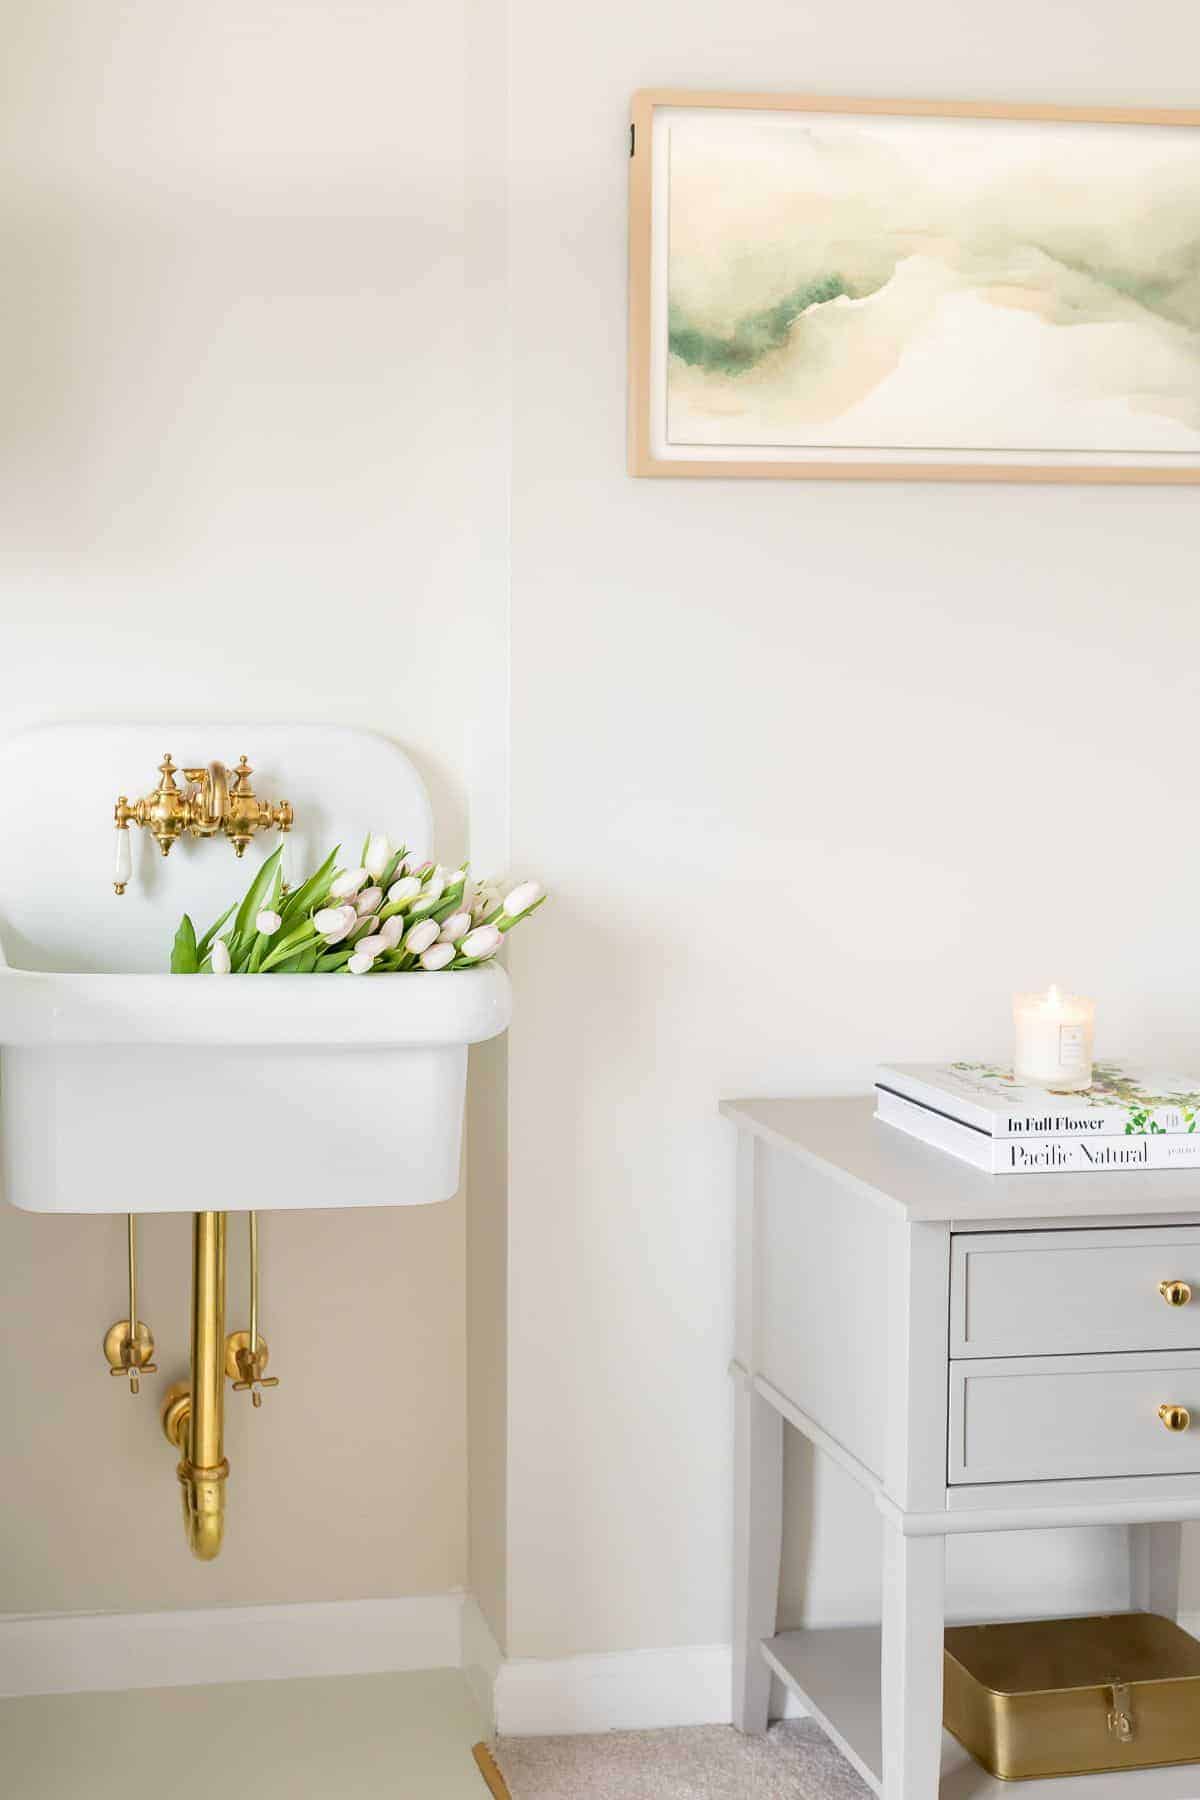 A wall sink filled with white tulips in a laundry room.